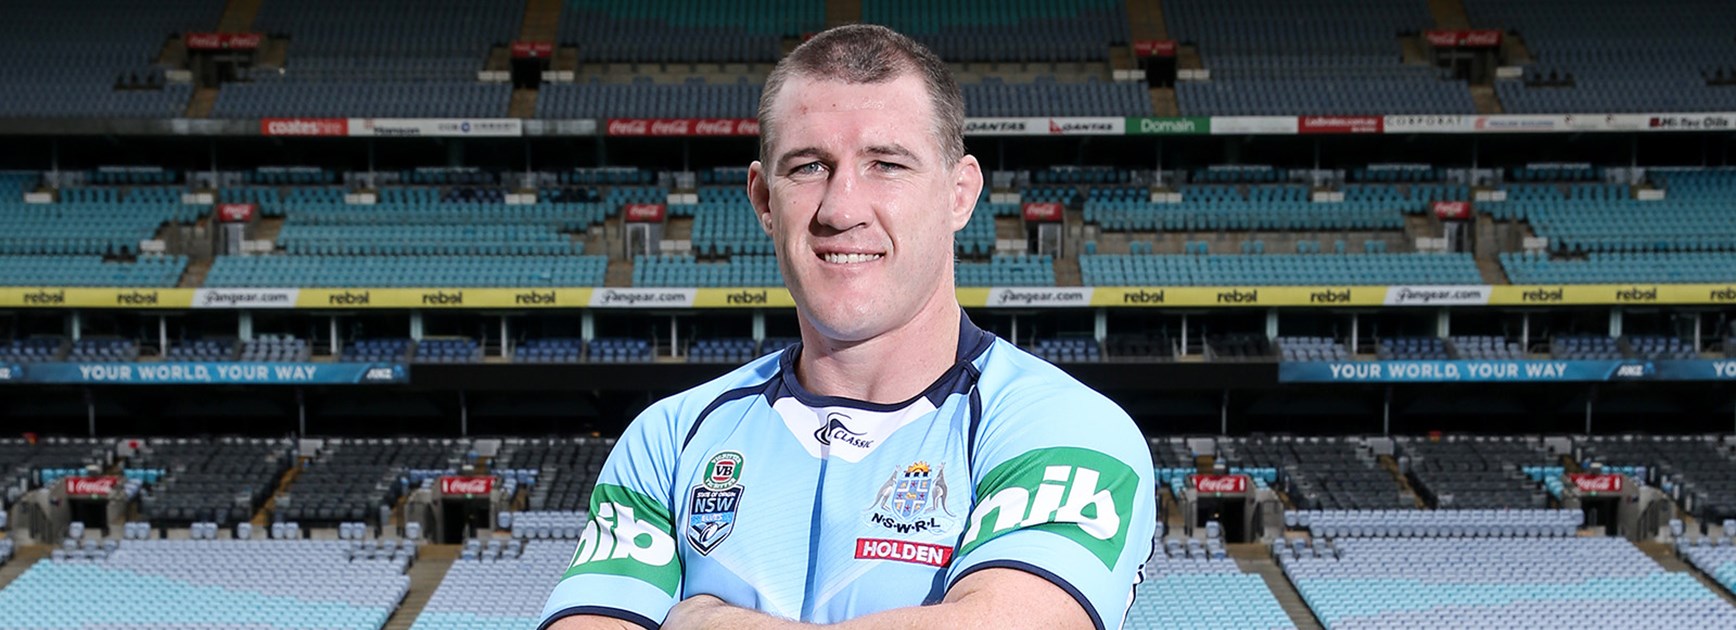 NSW captain Paul Gallen at the 2016 State of Origin Launch at ANZ Stadium.